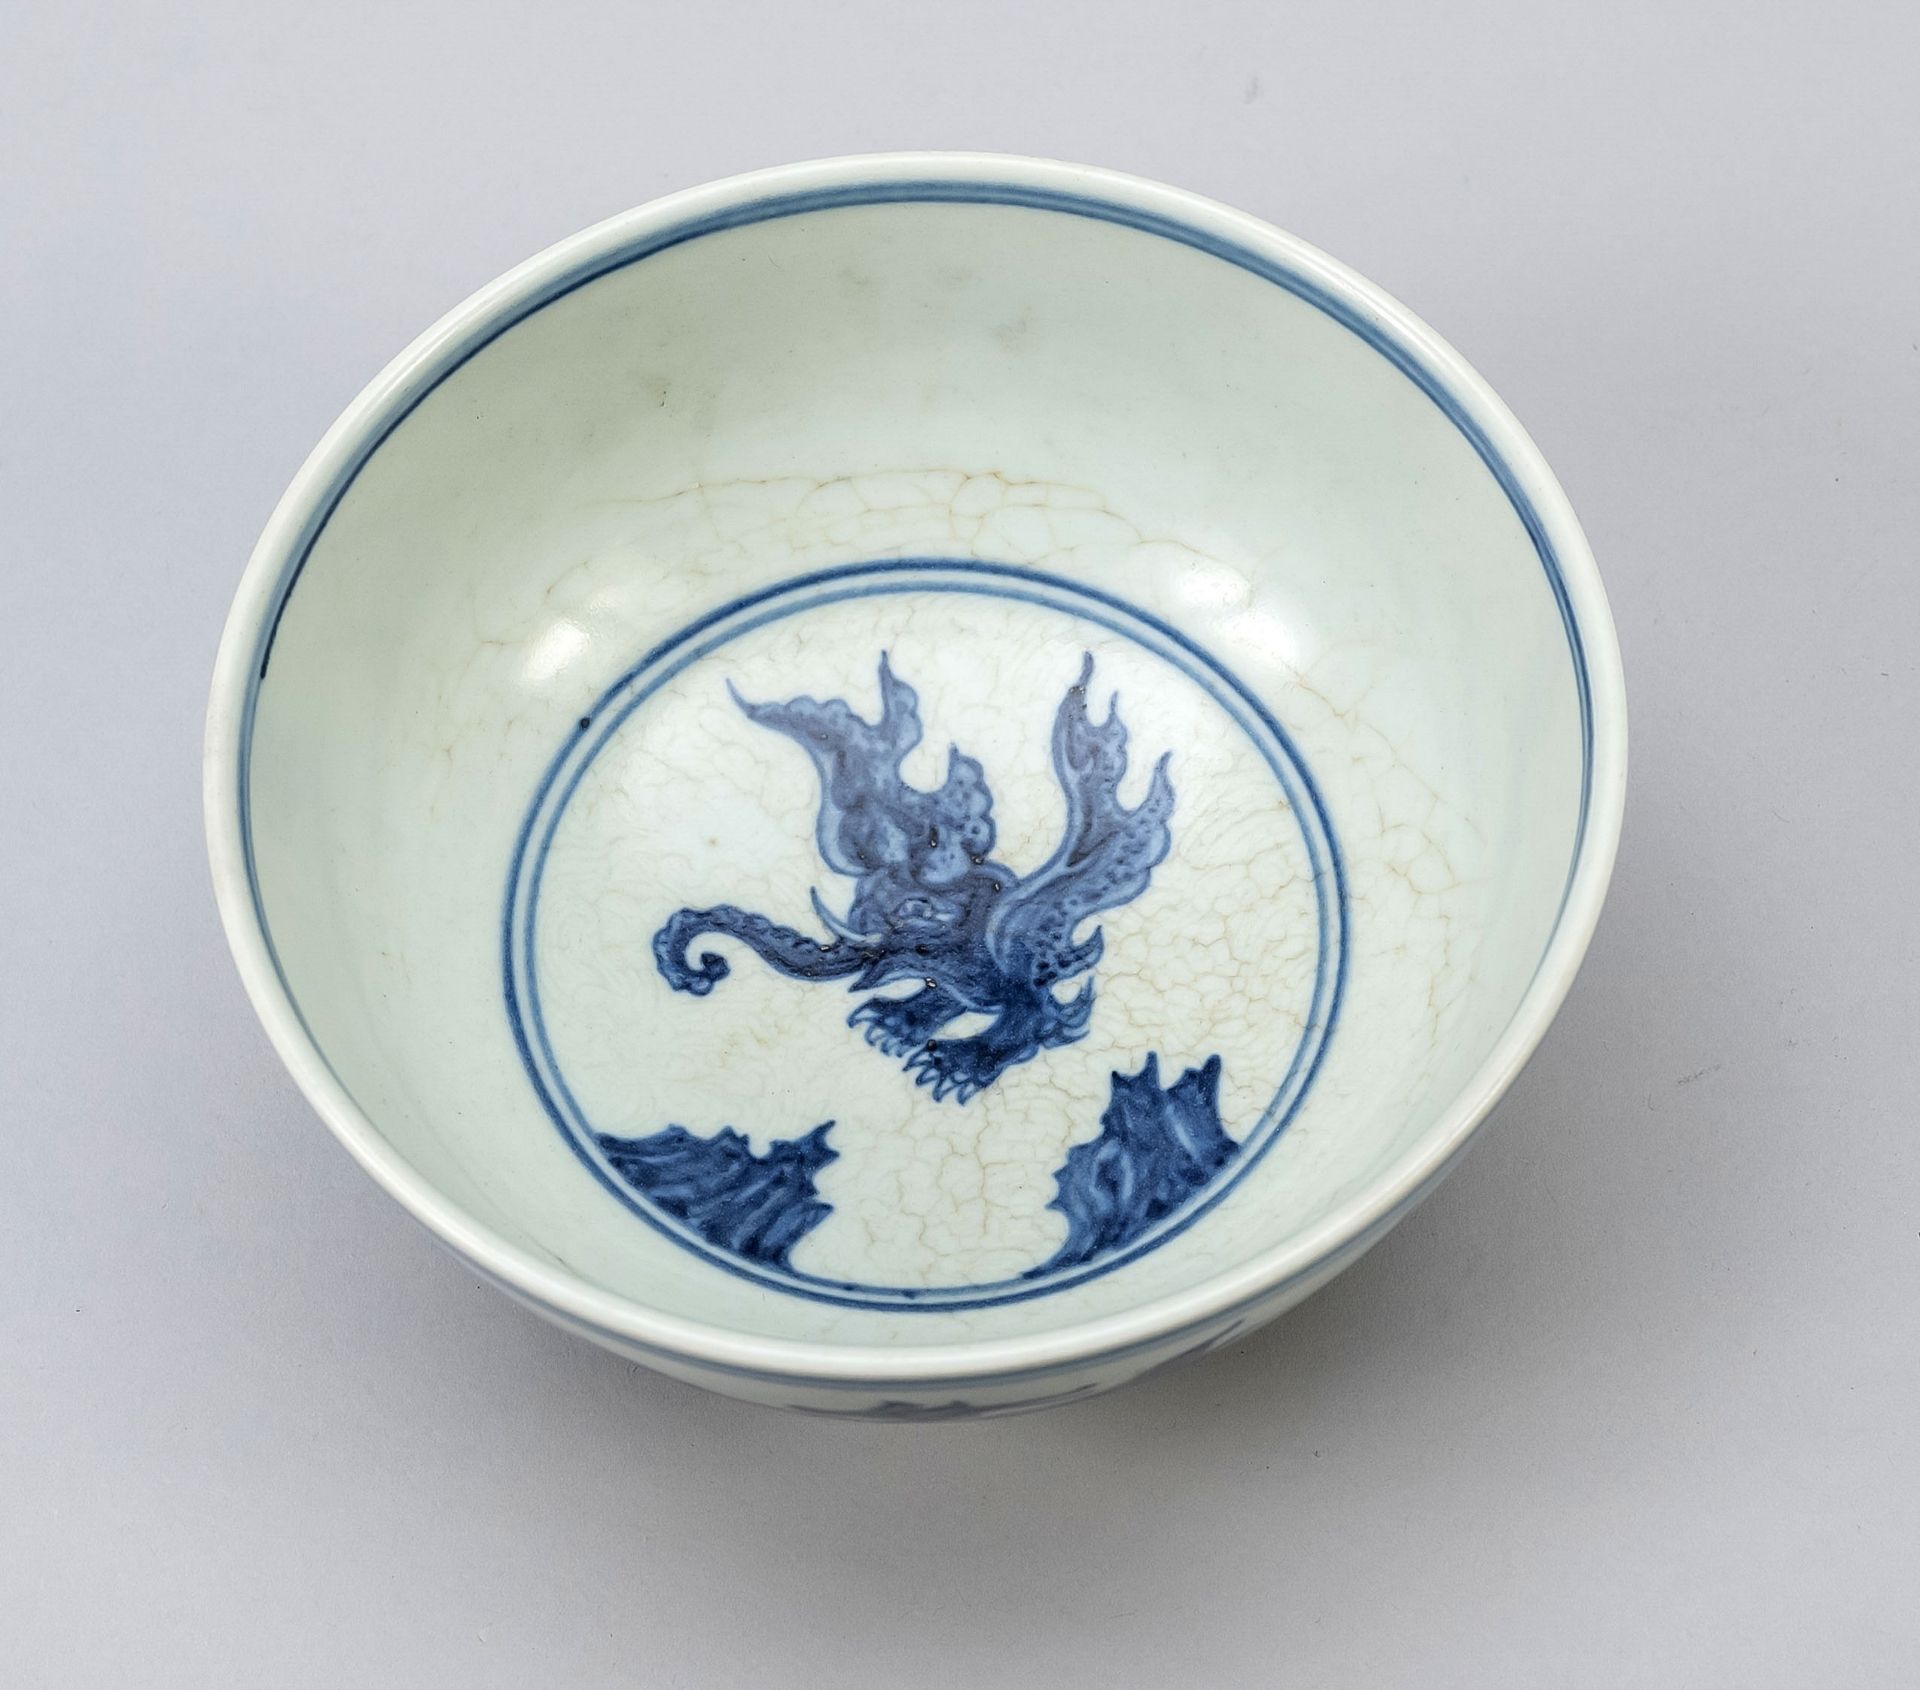 Bowl with mythical creatures and hidden decoration, probably Ming dynasty(1368-1644), porcelain bowl - Image 3 of 3